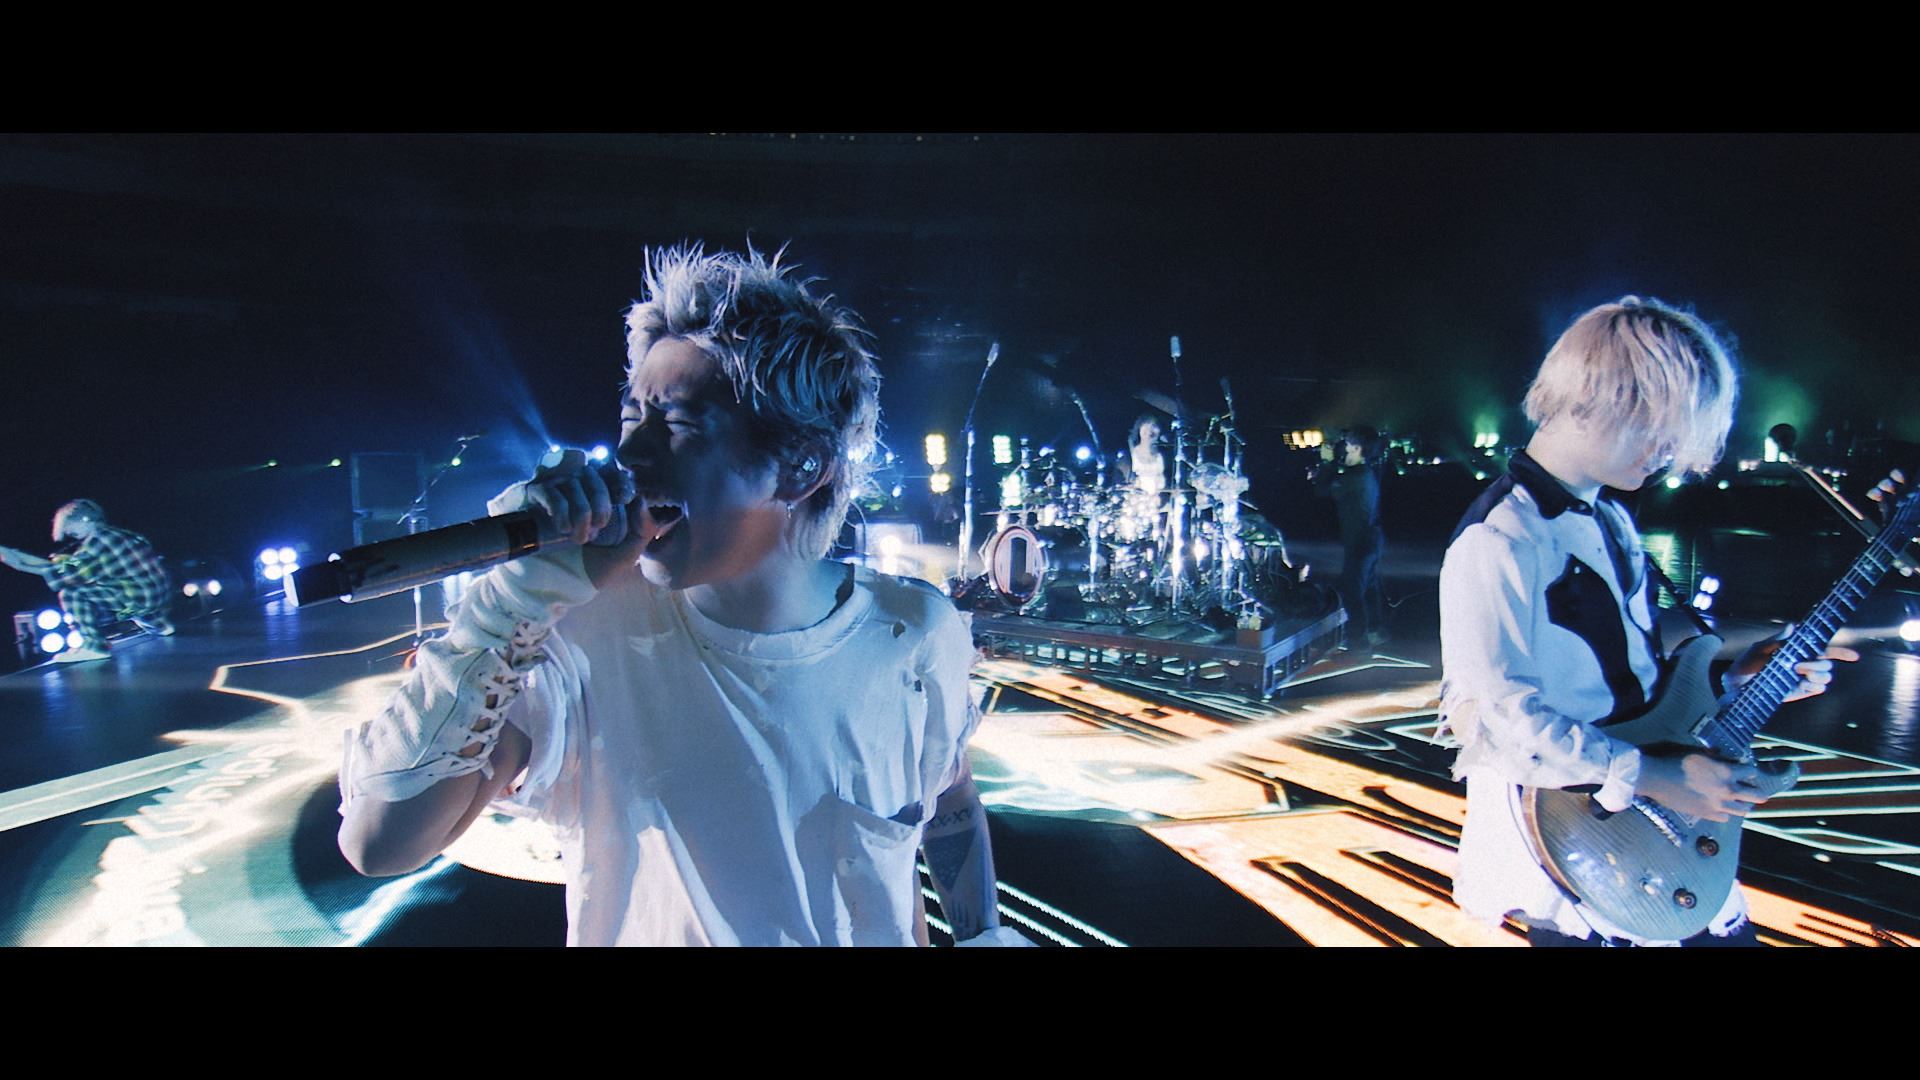 「ONE OK ROCK 2020 “Field of Wonder” at Stadium Live Streaming supported by au 5G LIVE」